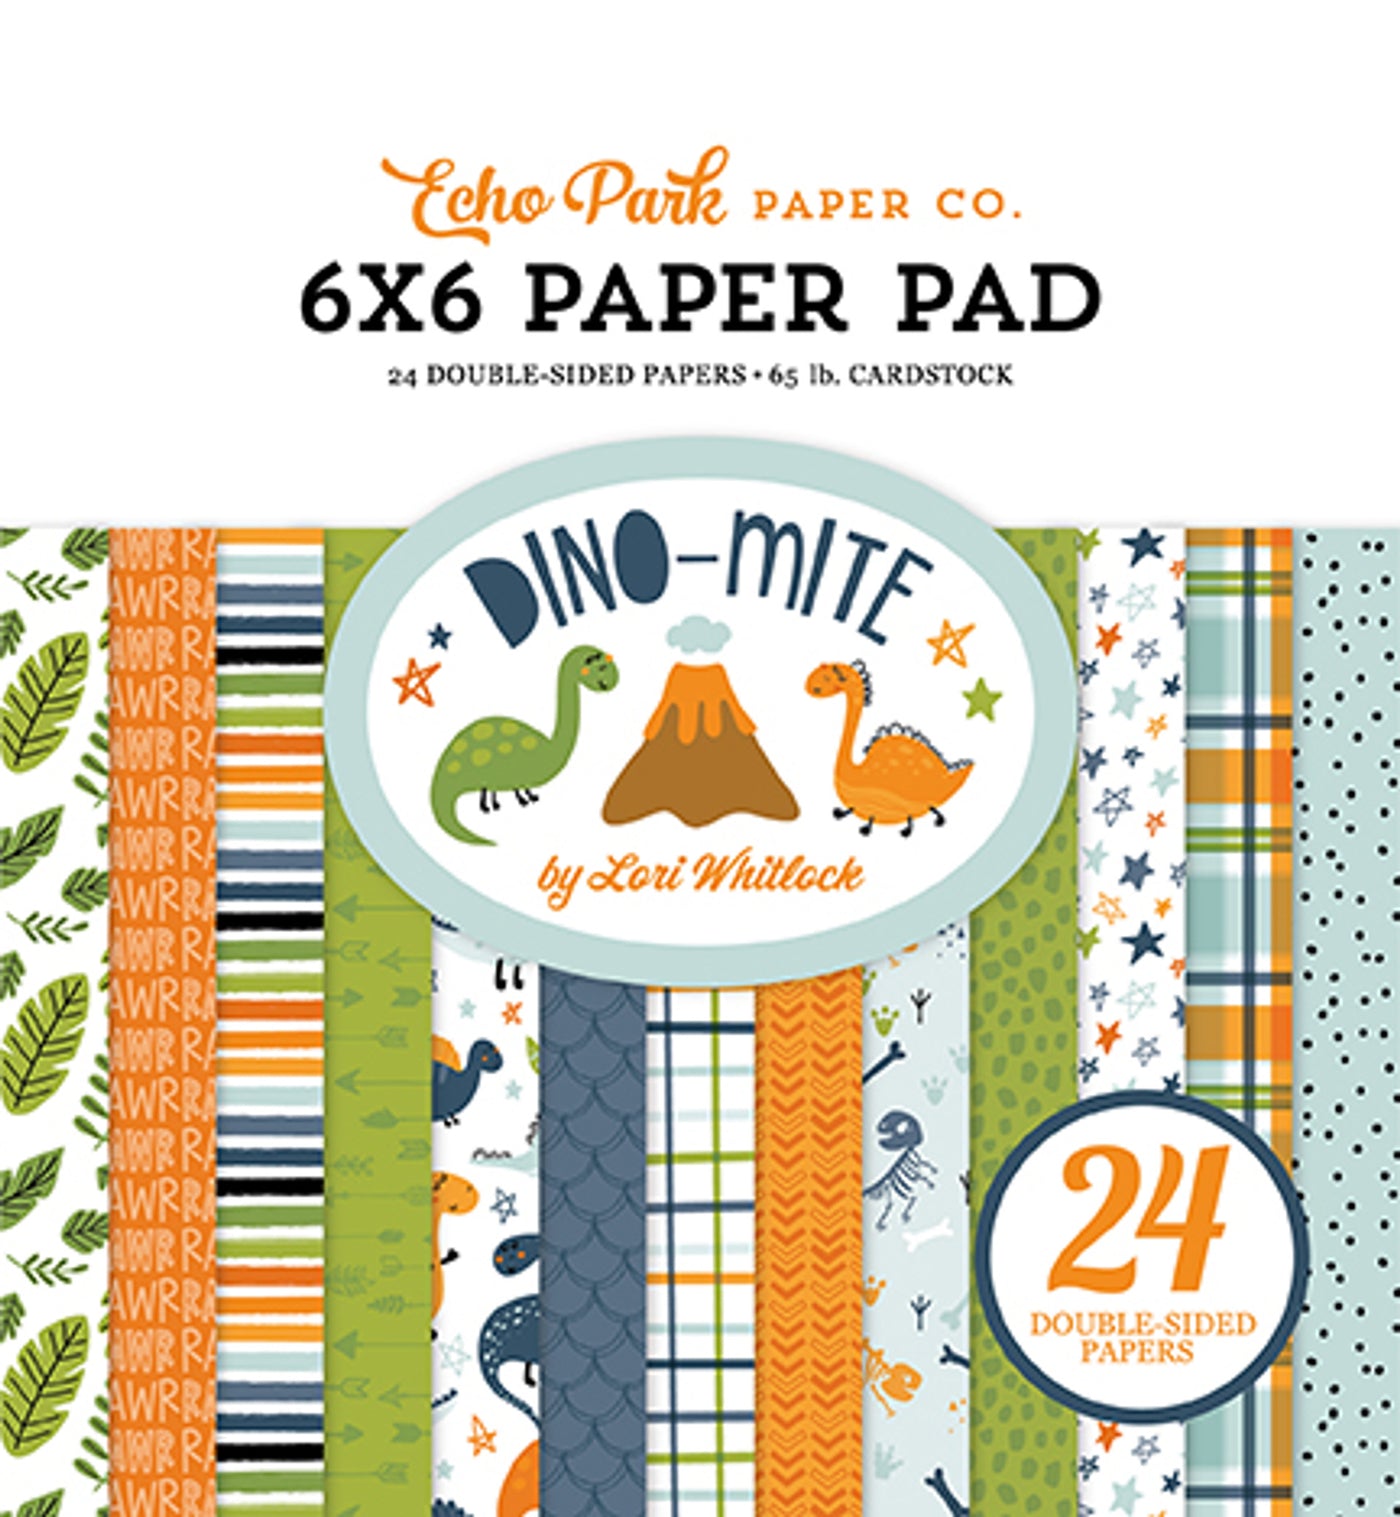 6x6 pad features cute designs and colors to celebrate a love for dinos! Fun for cards and papercrafts. Includes 24 double-sided pages.